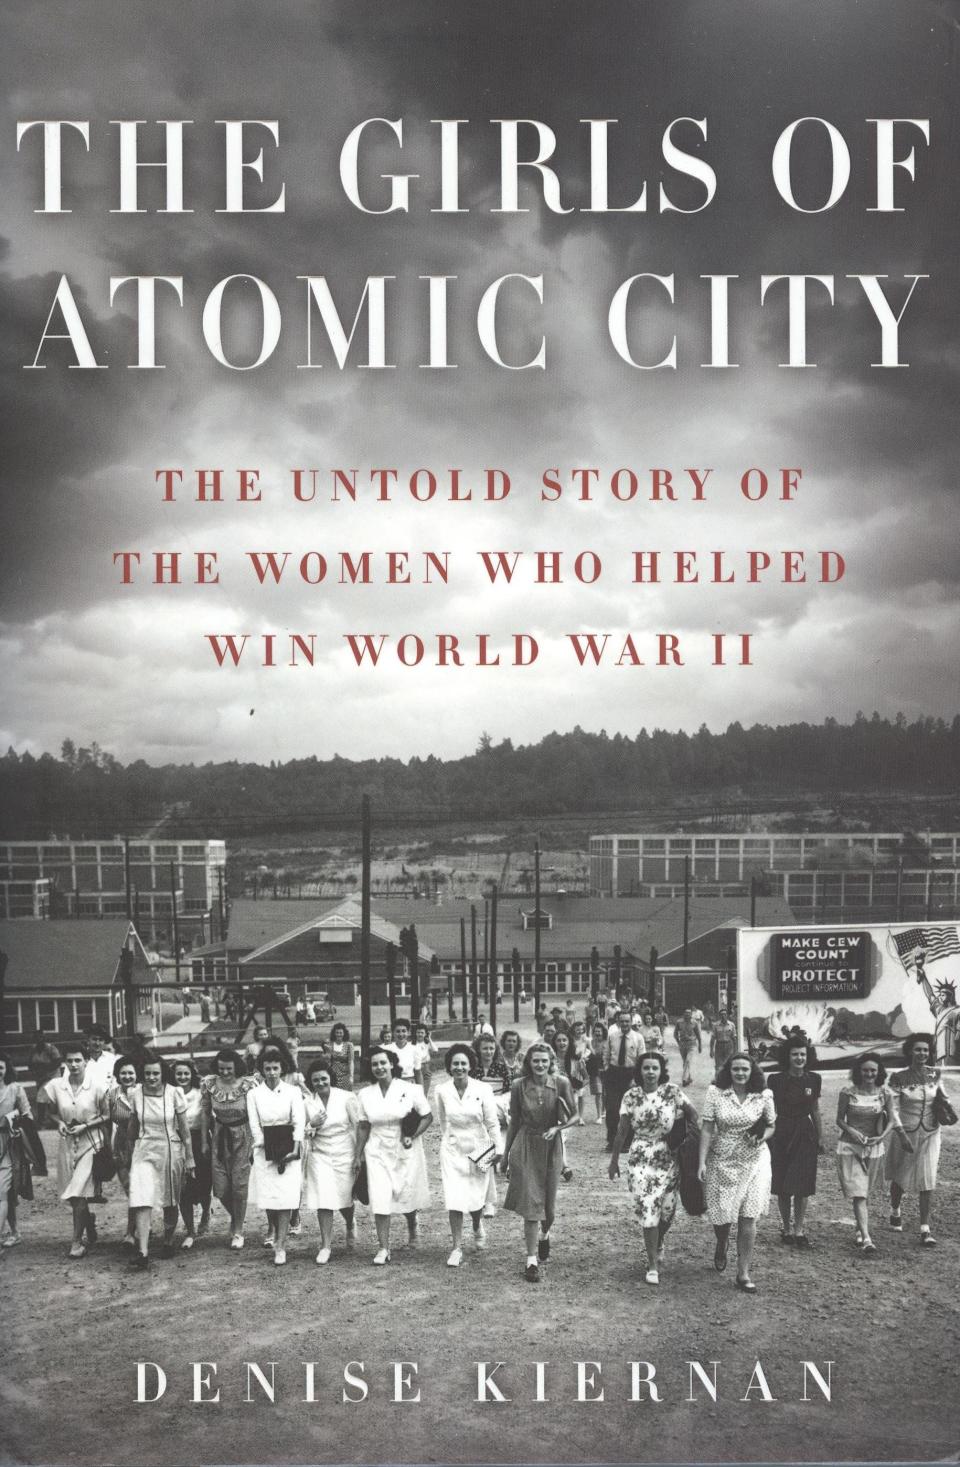 "The Girls of Atomic City"